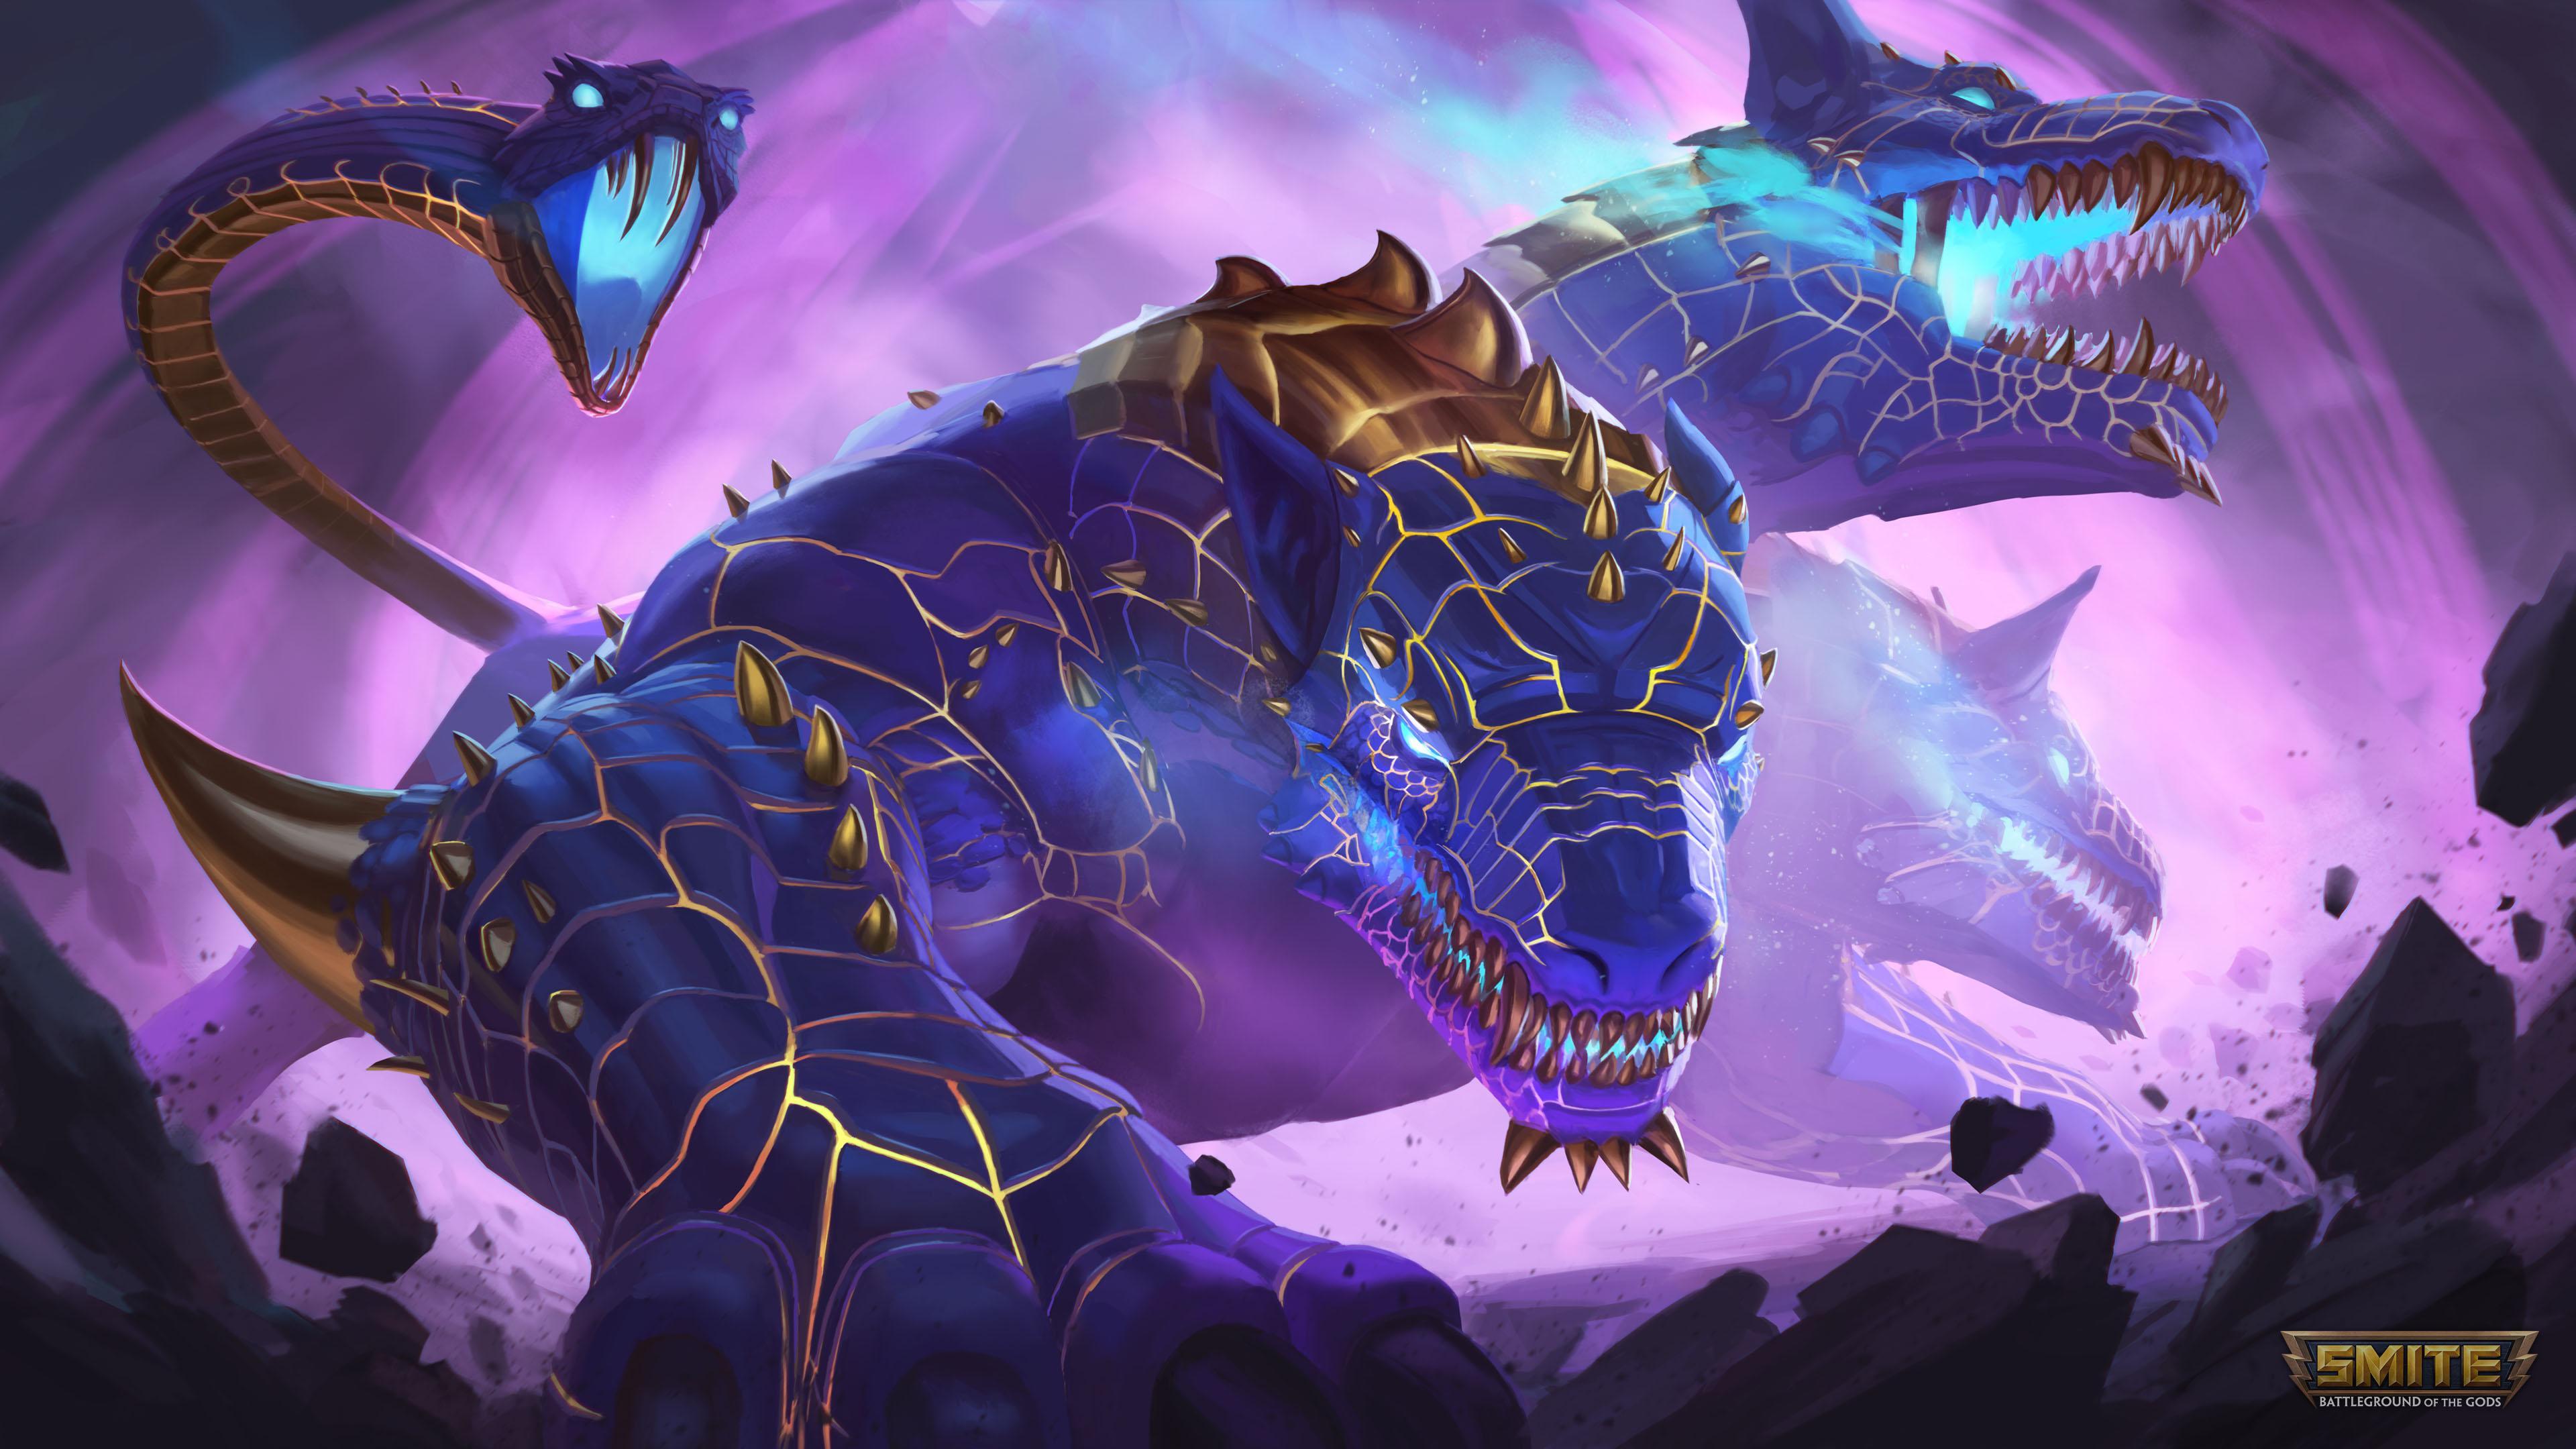 Smite Hd Wallpapers Free - Smite Cerberus Mastery Skins , HD Wallpaper & Backgrounds